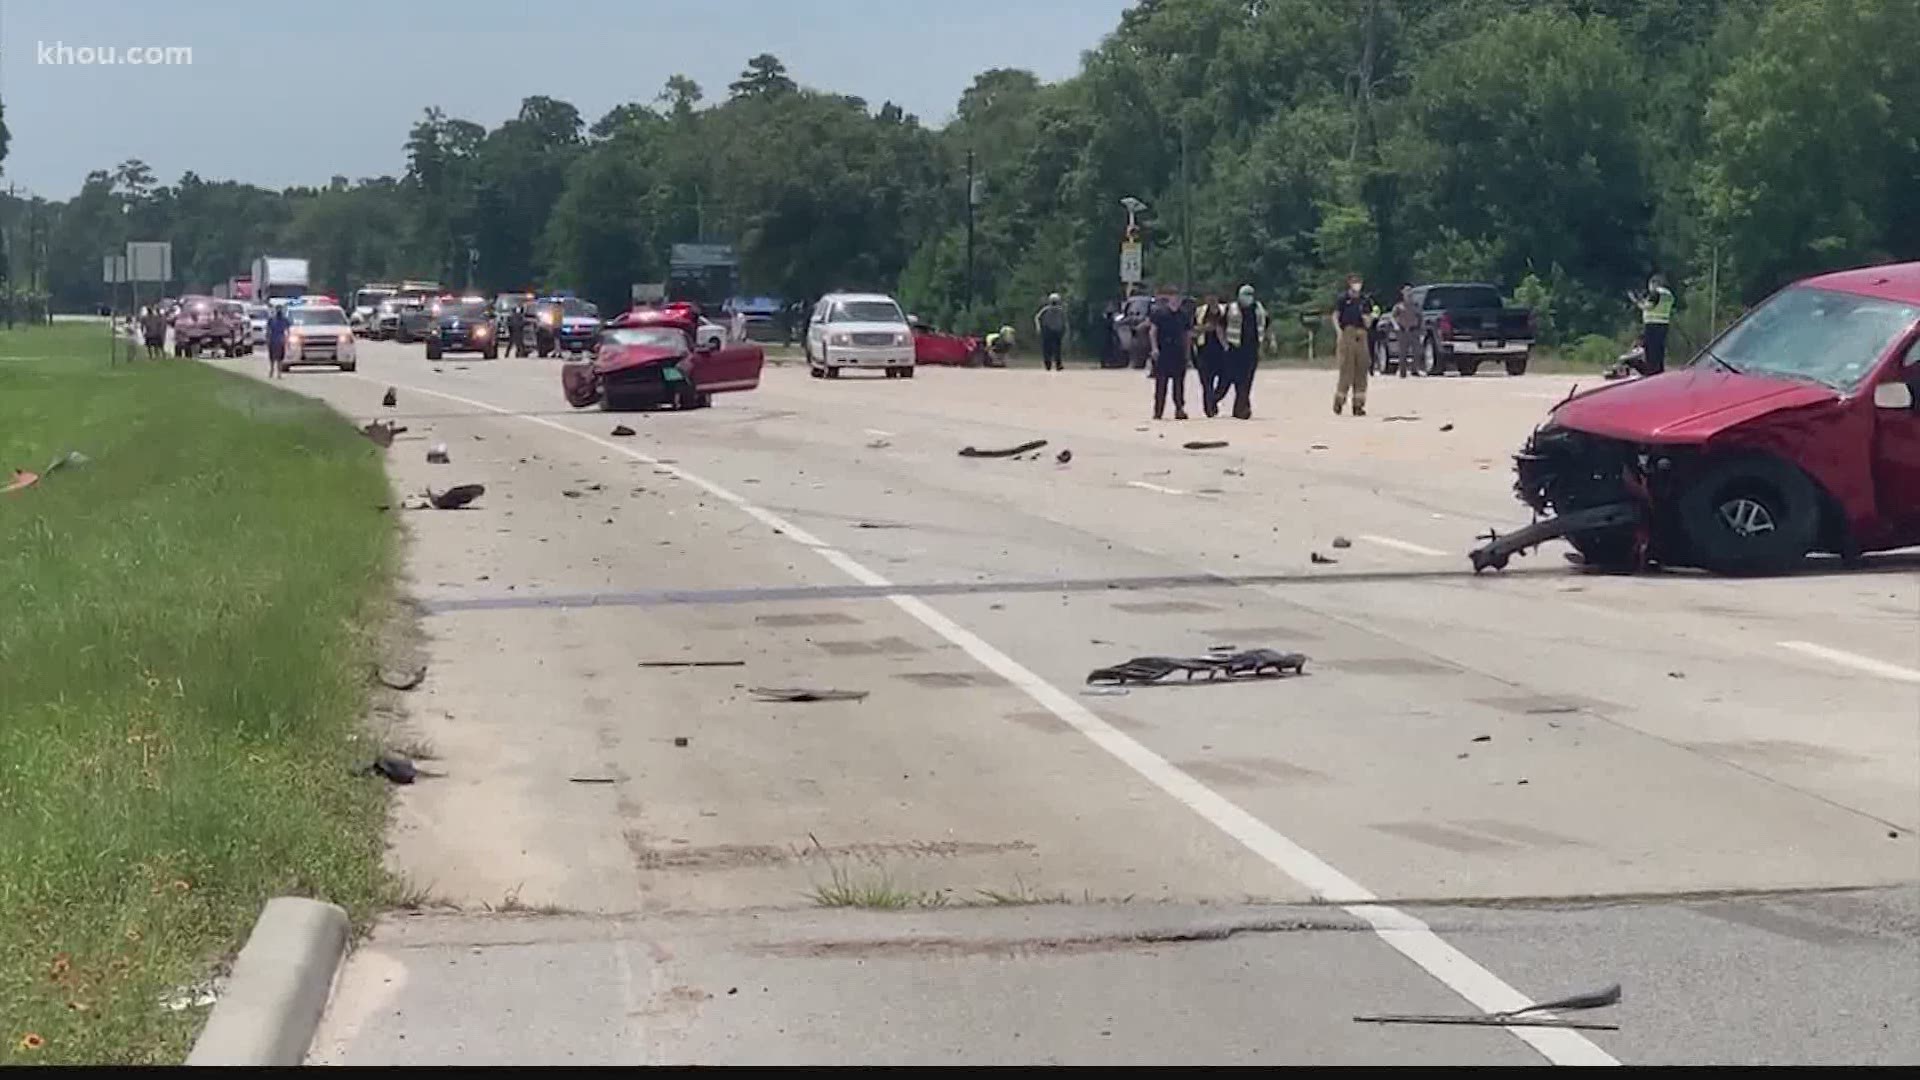 Investigators said they think two Mustangs were racing when they hit a truck. One of the cars then struck a motorcycle head-on, killing the rider.